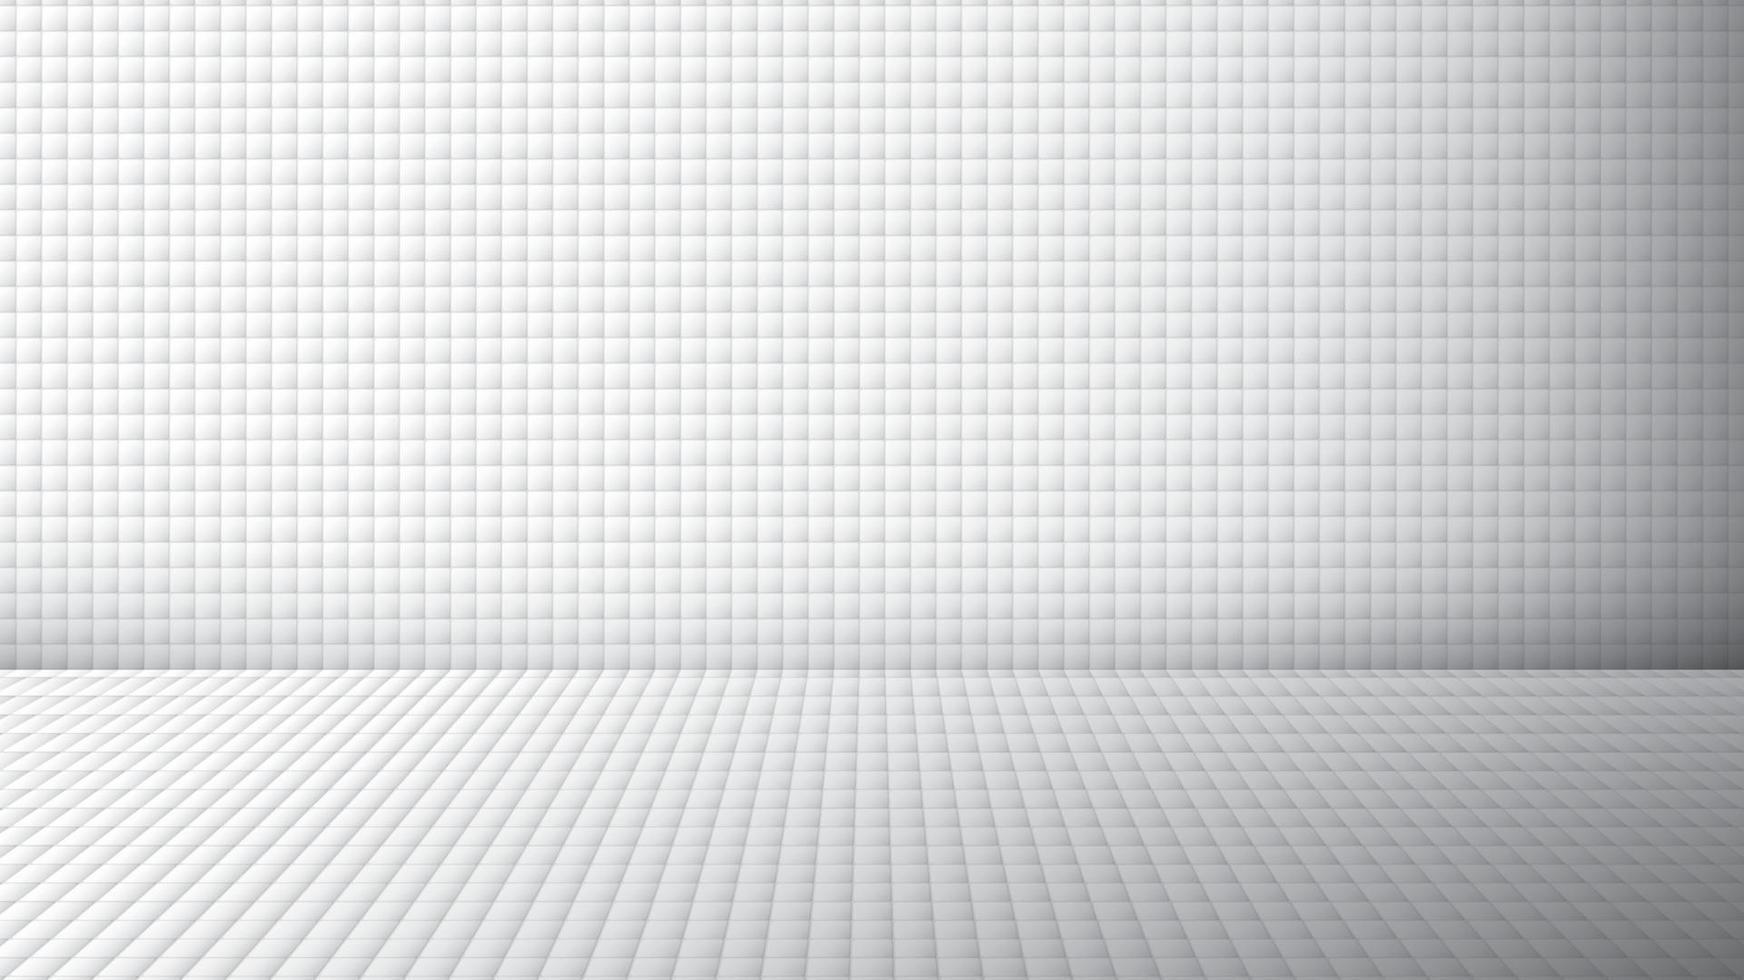 Mosaic square shape floor and wall white tone backgrounds. Room, interior or display products. vector